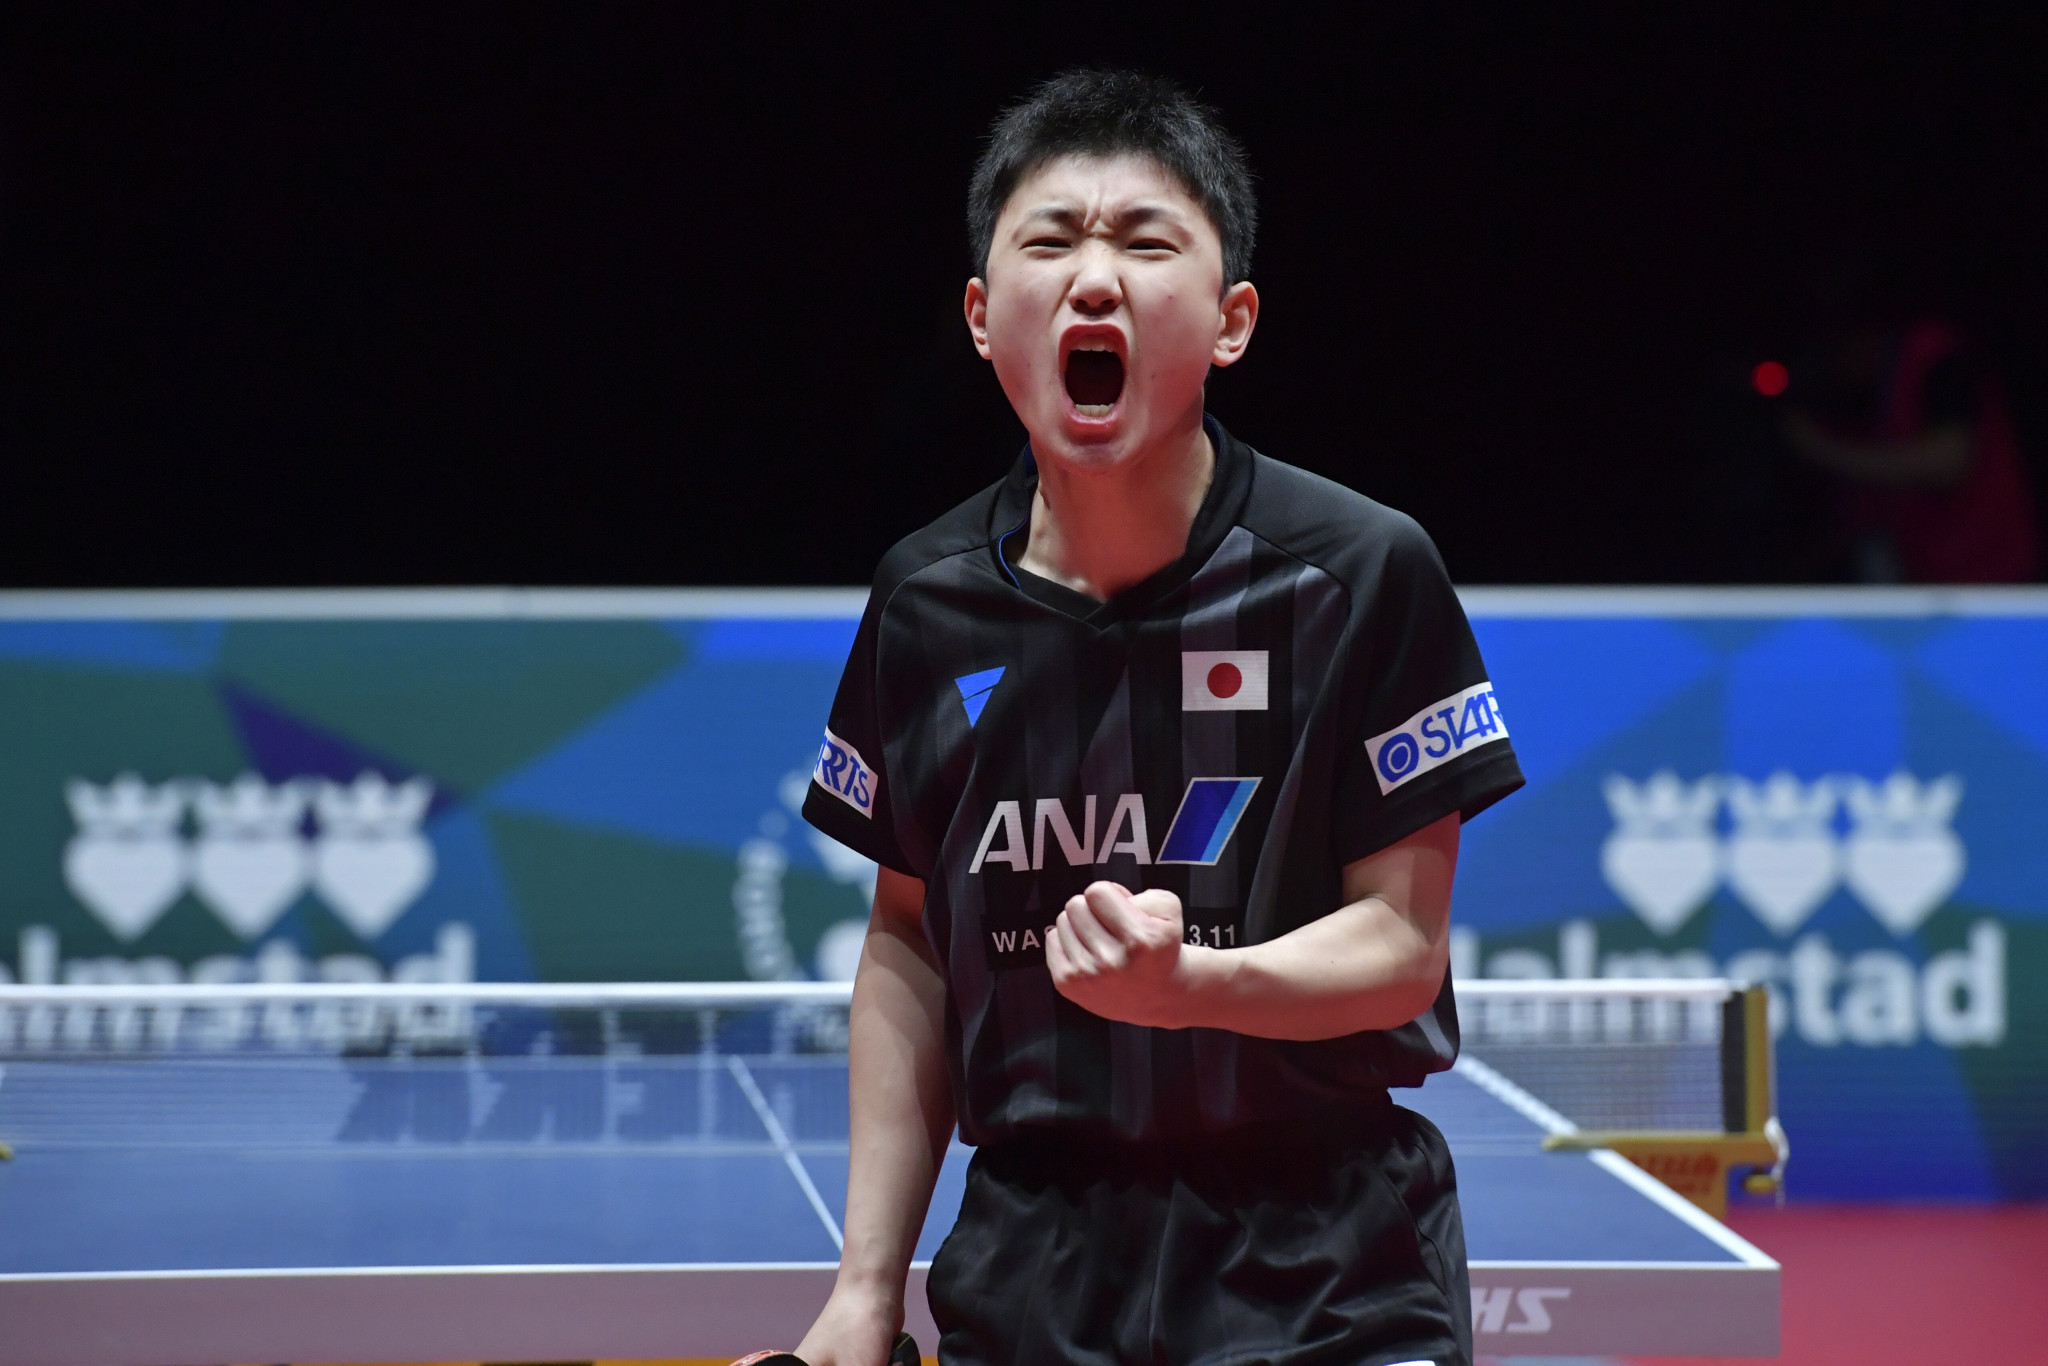 Tomokazu Harimoto has taken the table tennis world by storm in the last year ©Getty Images